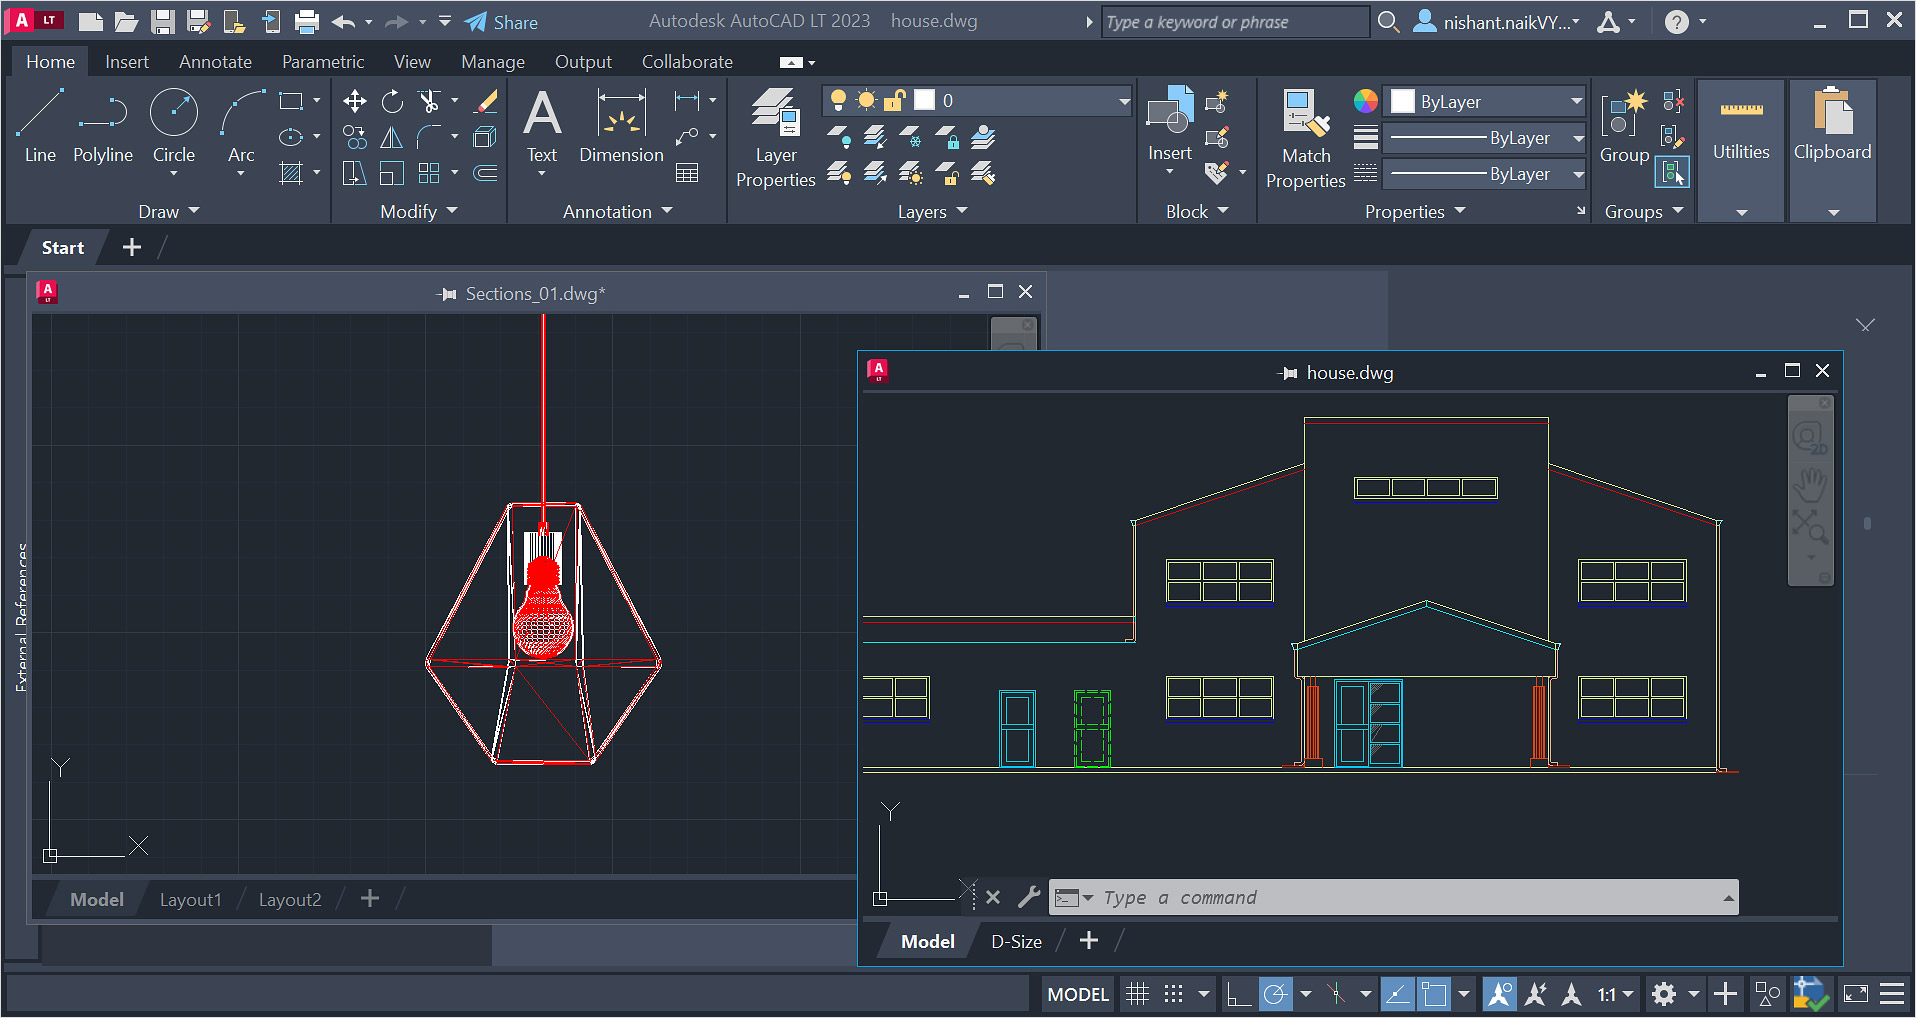 Autocad Lt Key Features 2022 | Upcoming Advanced Features 2023 | Autodesk